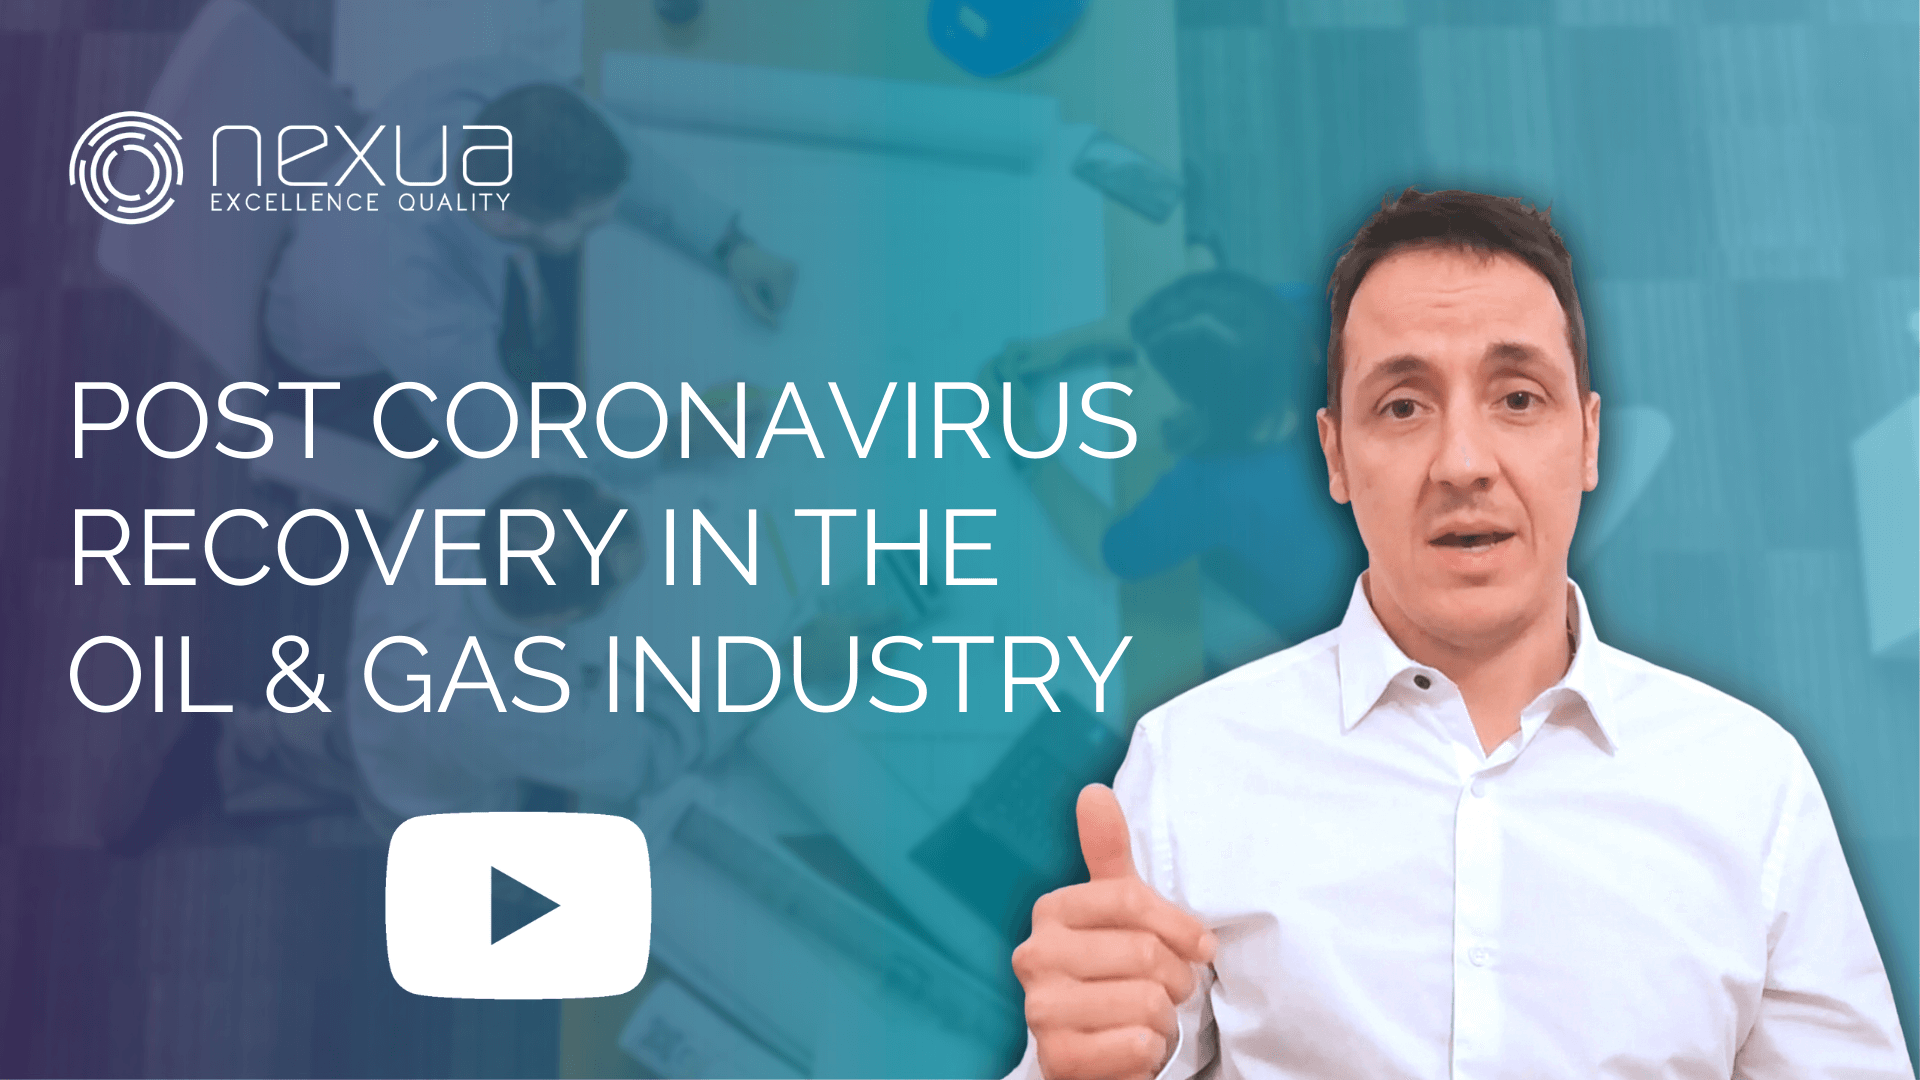 Cover with play sign of the Video POST CORONAVIRUS RECOVERY IN THE OIL & GAS INDUSTRY by NEXUA EXCELLENCE QUALITY